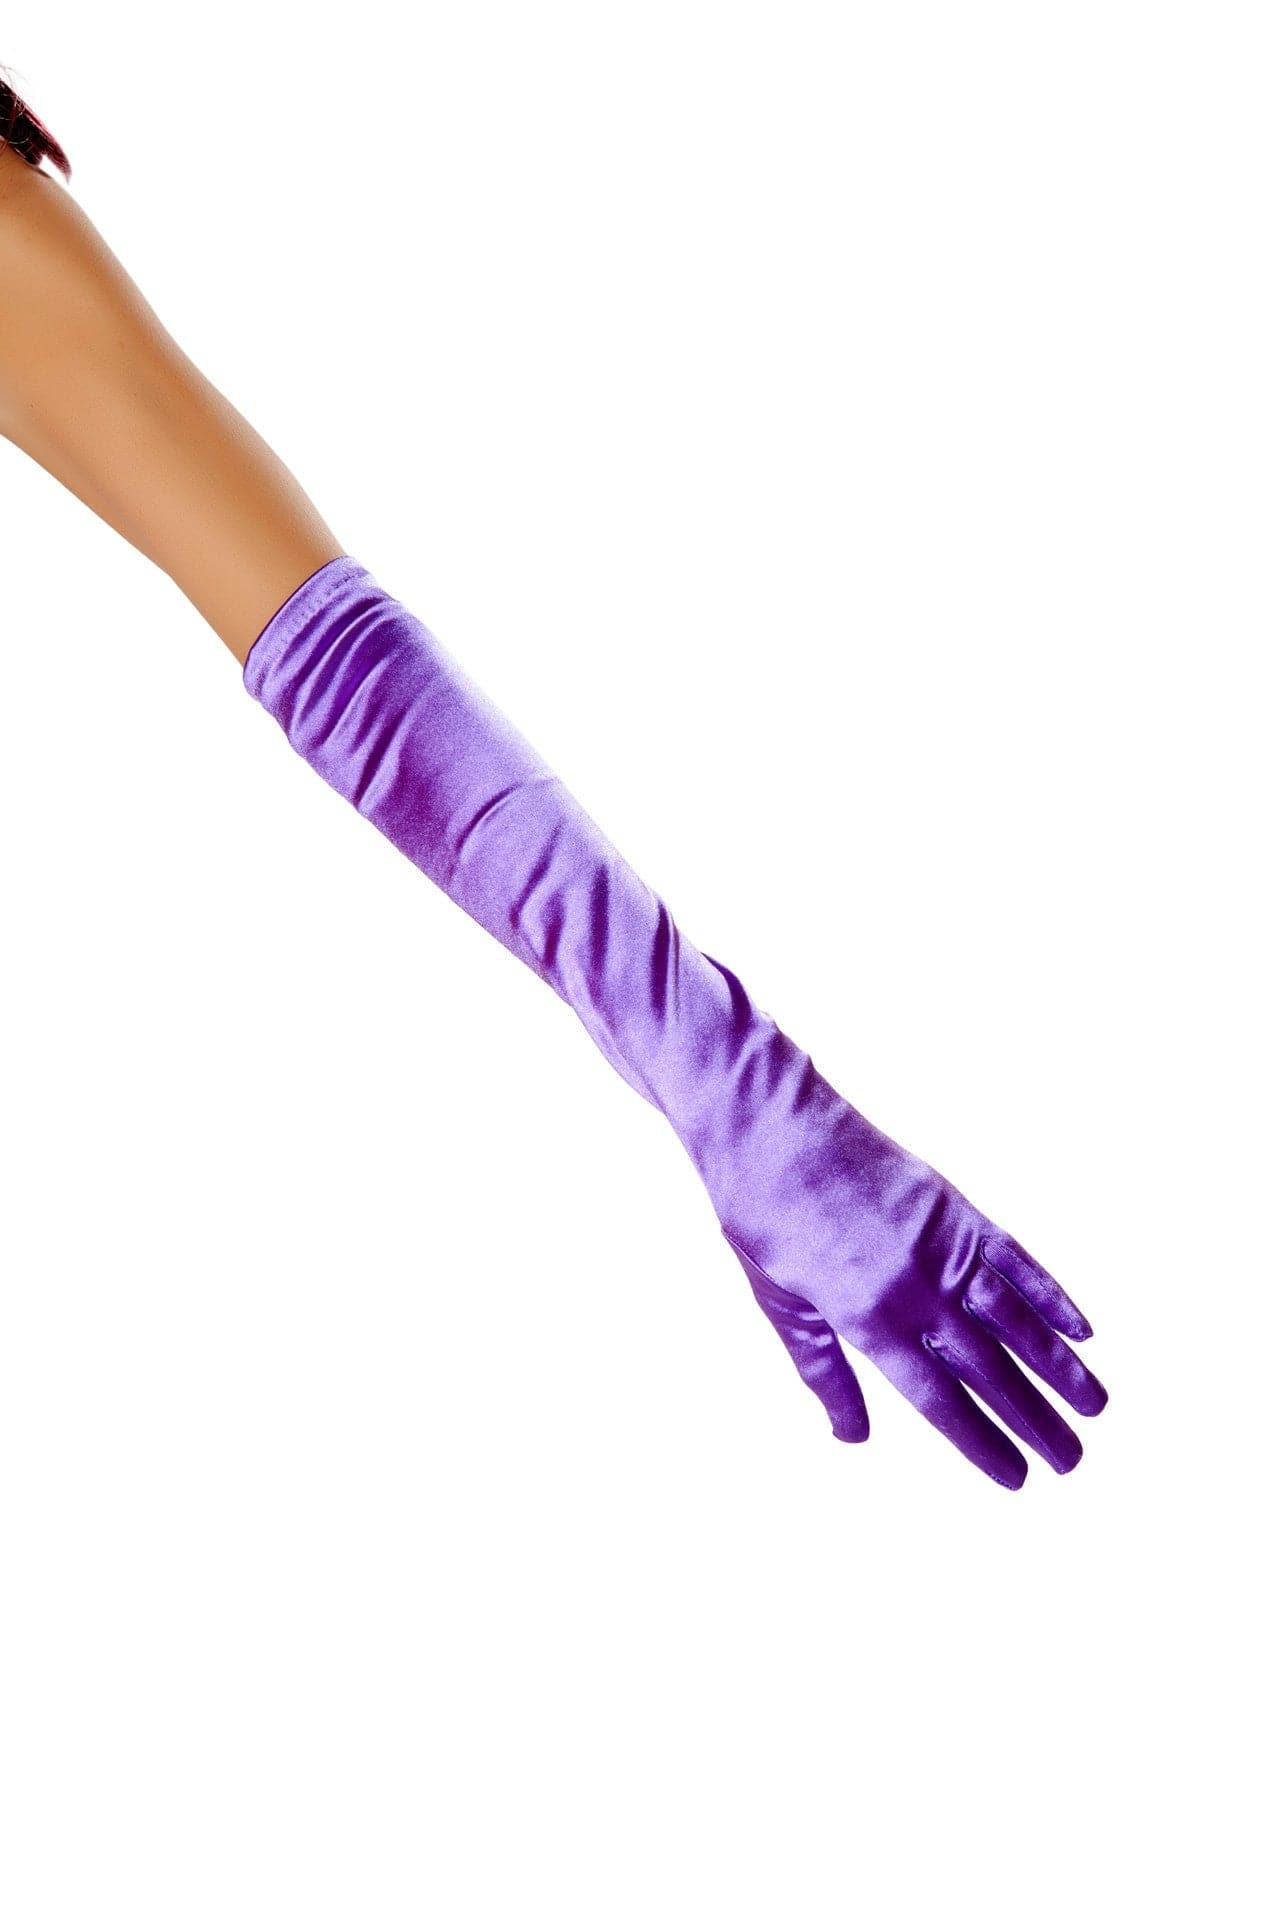 2pc. Stretch Satin Gloves Costume Accessories - For Love of Lingerie